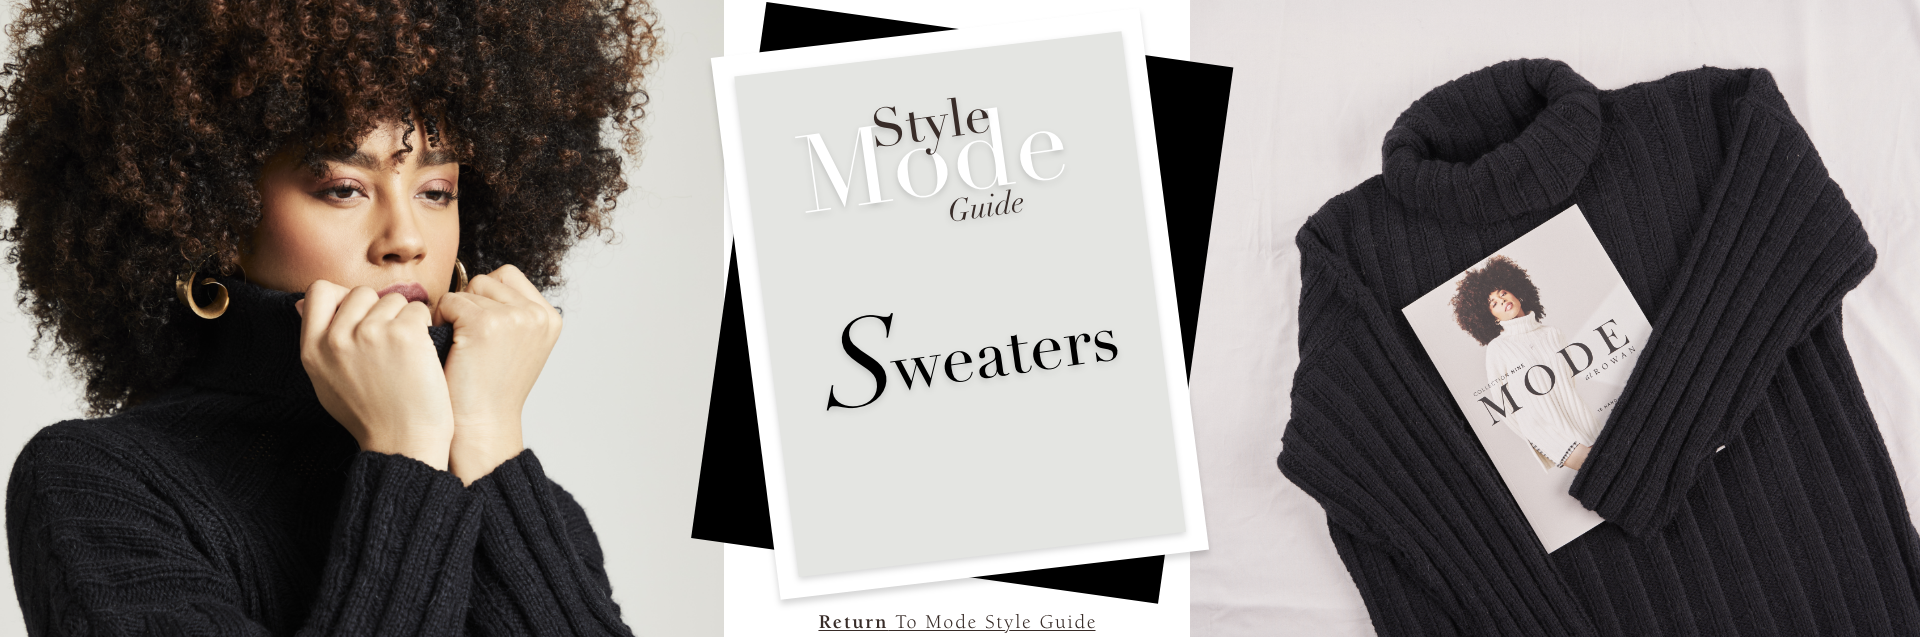 MODE Style Guide Sweaters